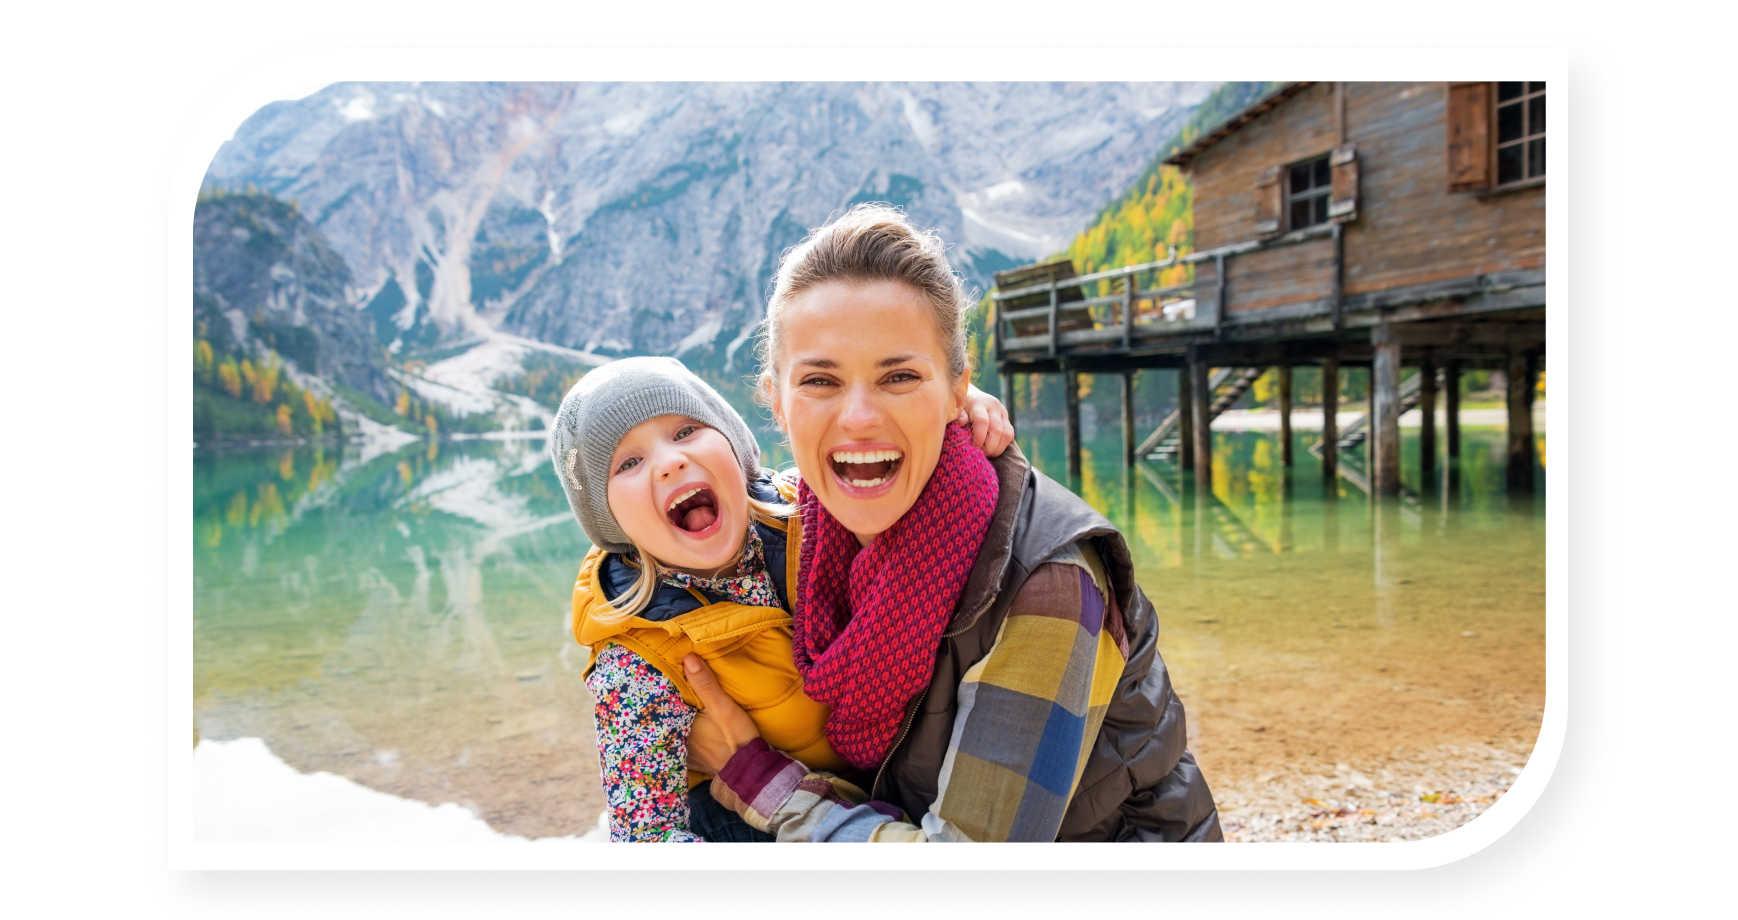 Very happy mom and kid in Dolomites